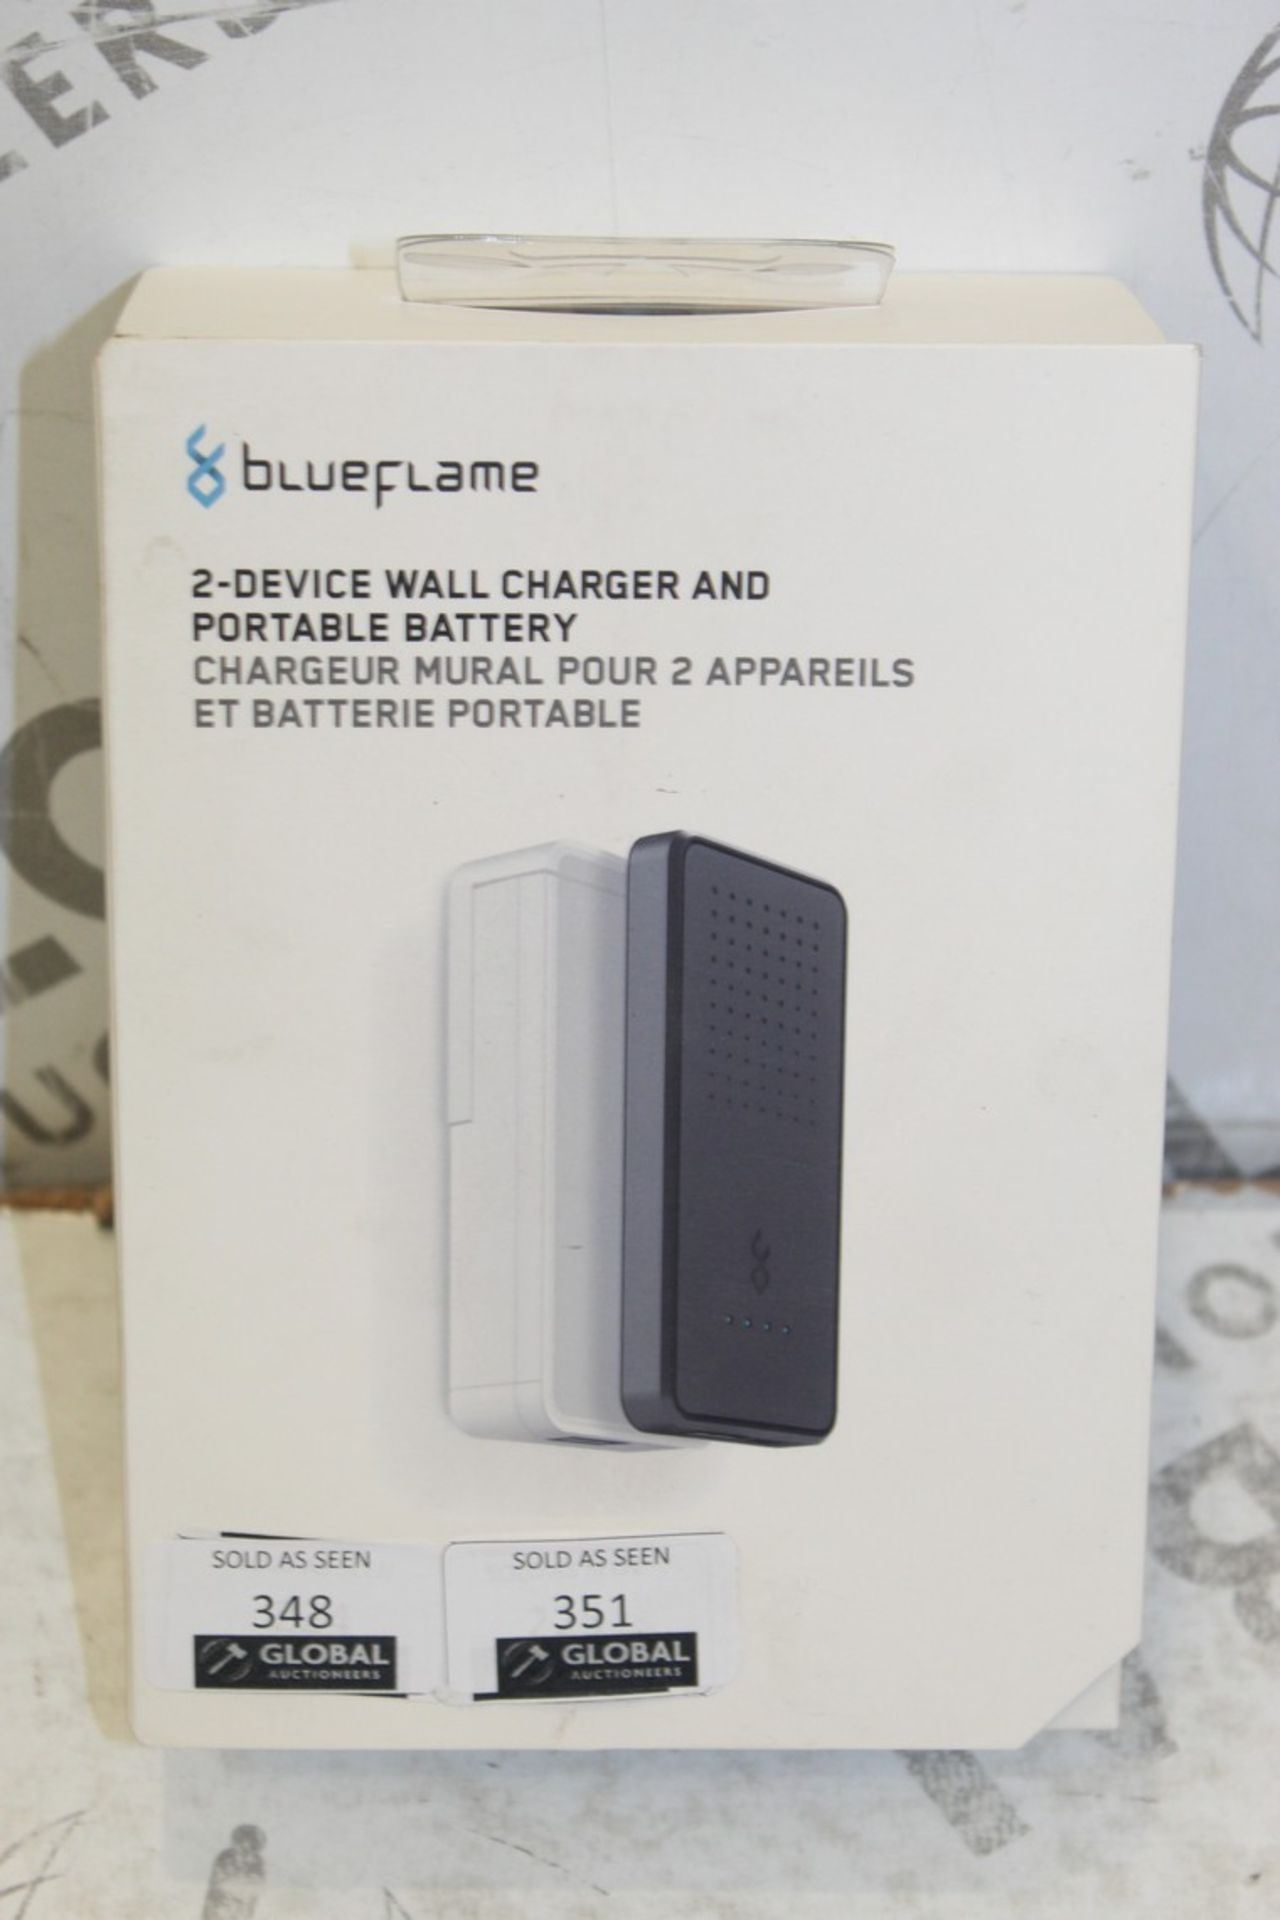 Lot to Contain 2 Boxed Brand New Blue Flame Voice Wall Chargers with Portable, Removable Battery